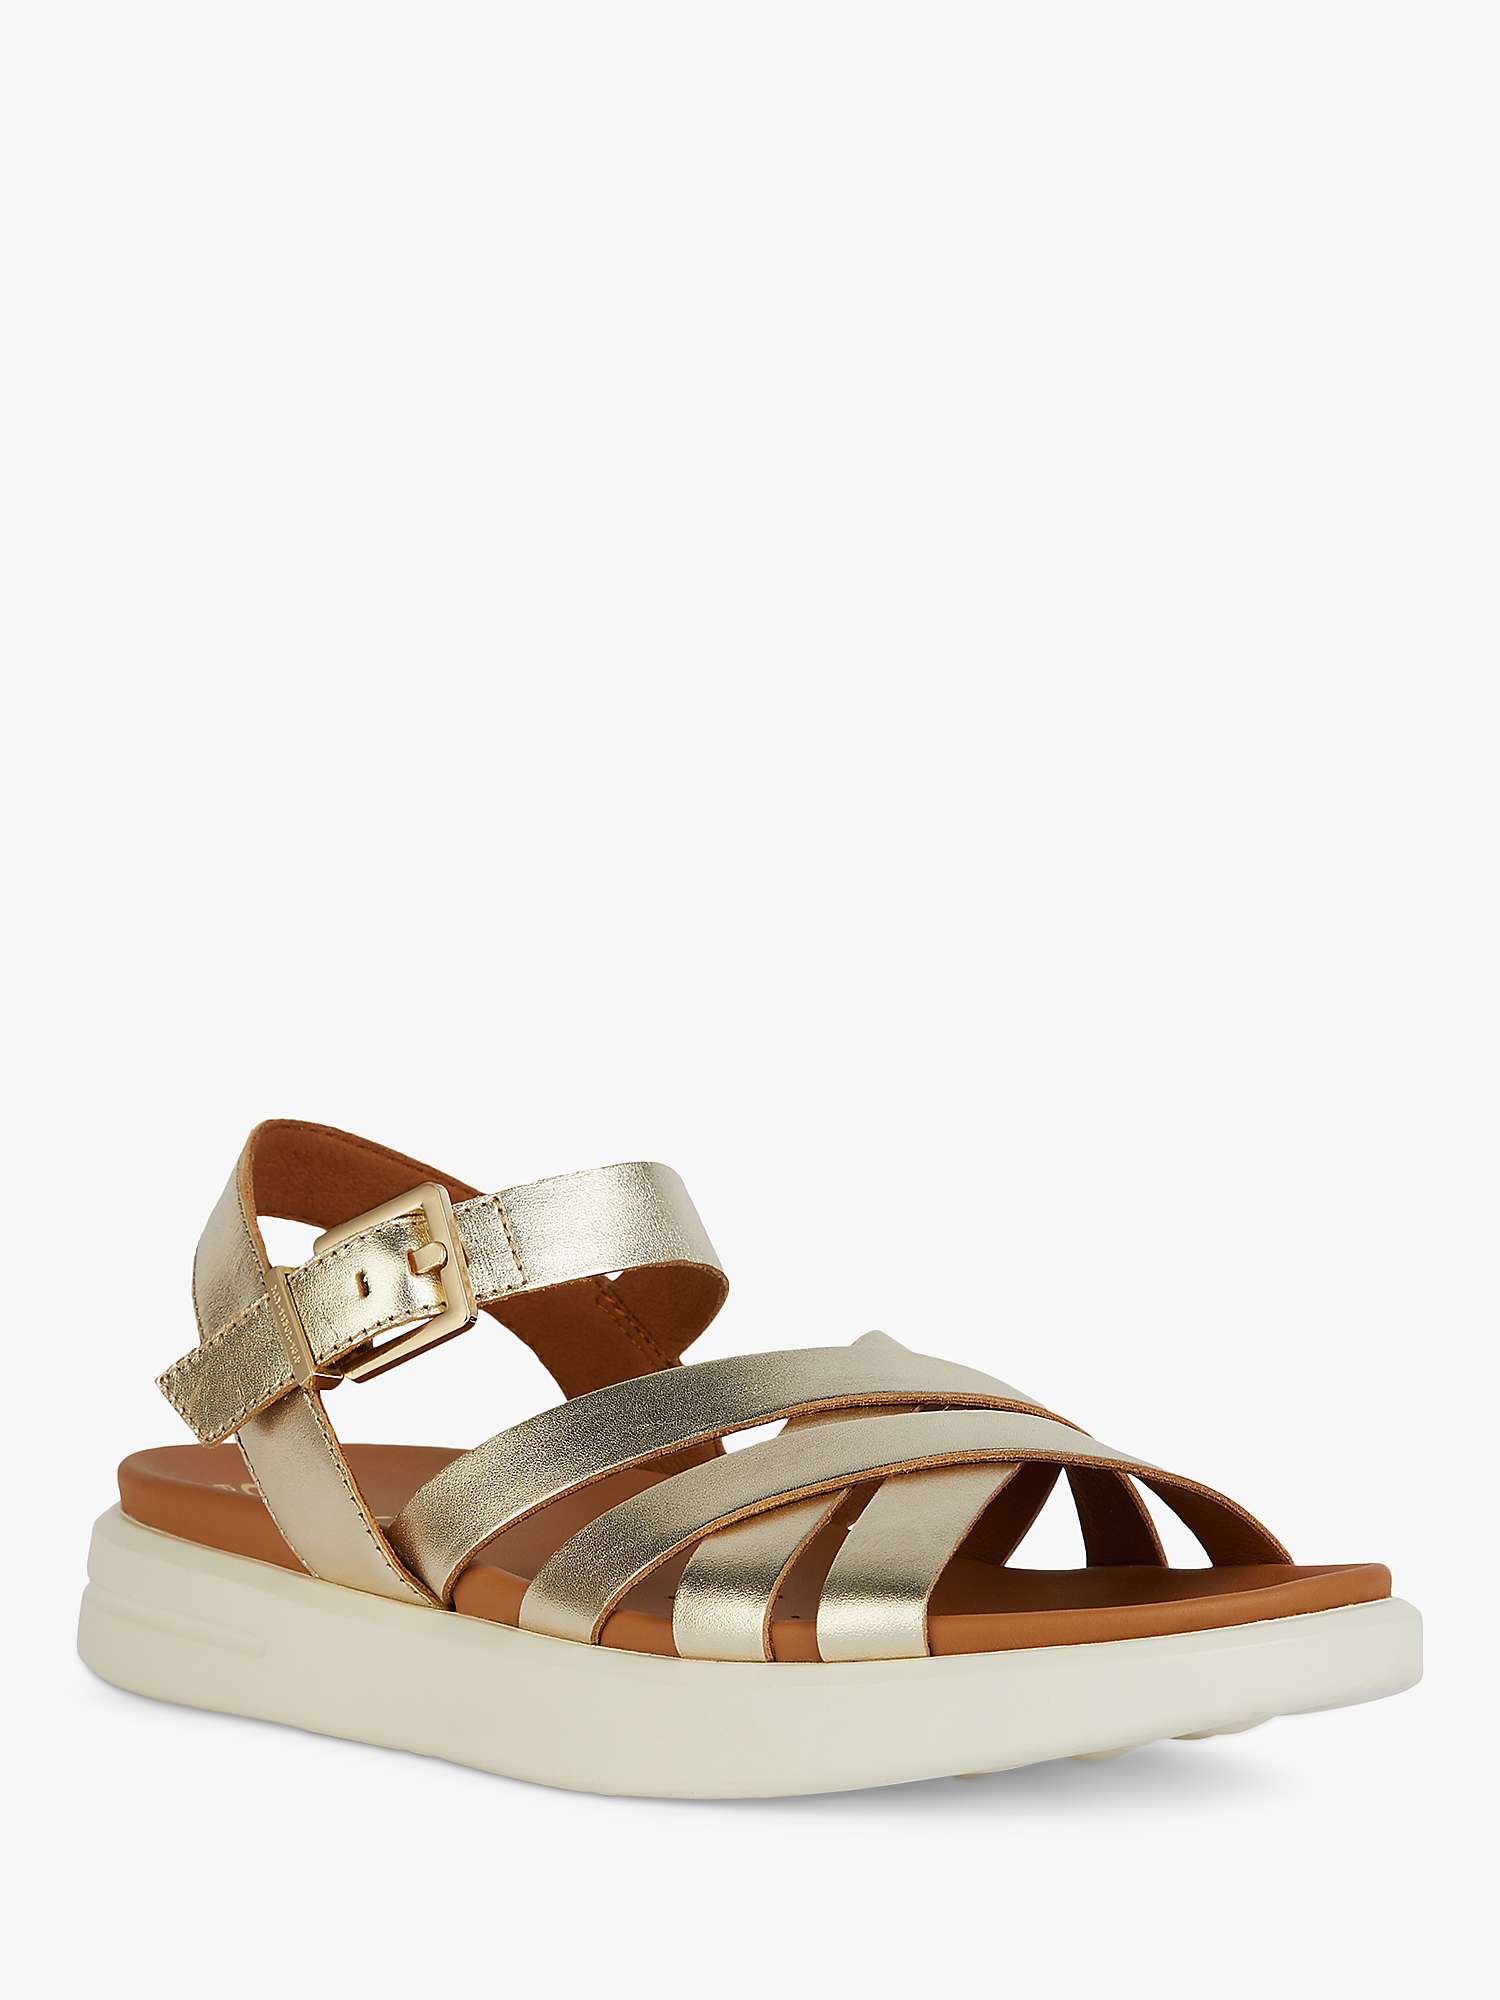 Buy Geox Xand 2S Lightweight Breathable Leather Sandals Online at johnlewis.com